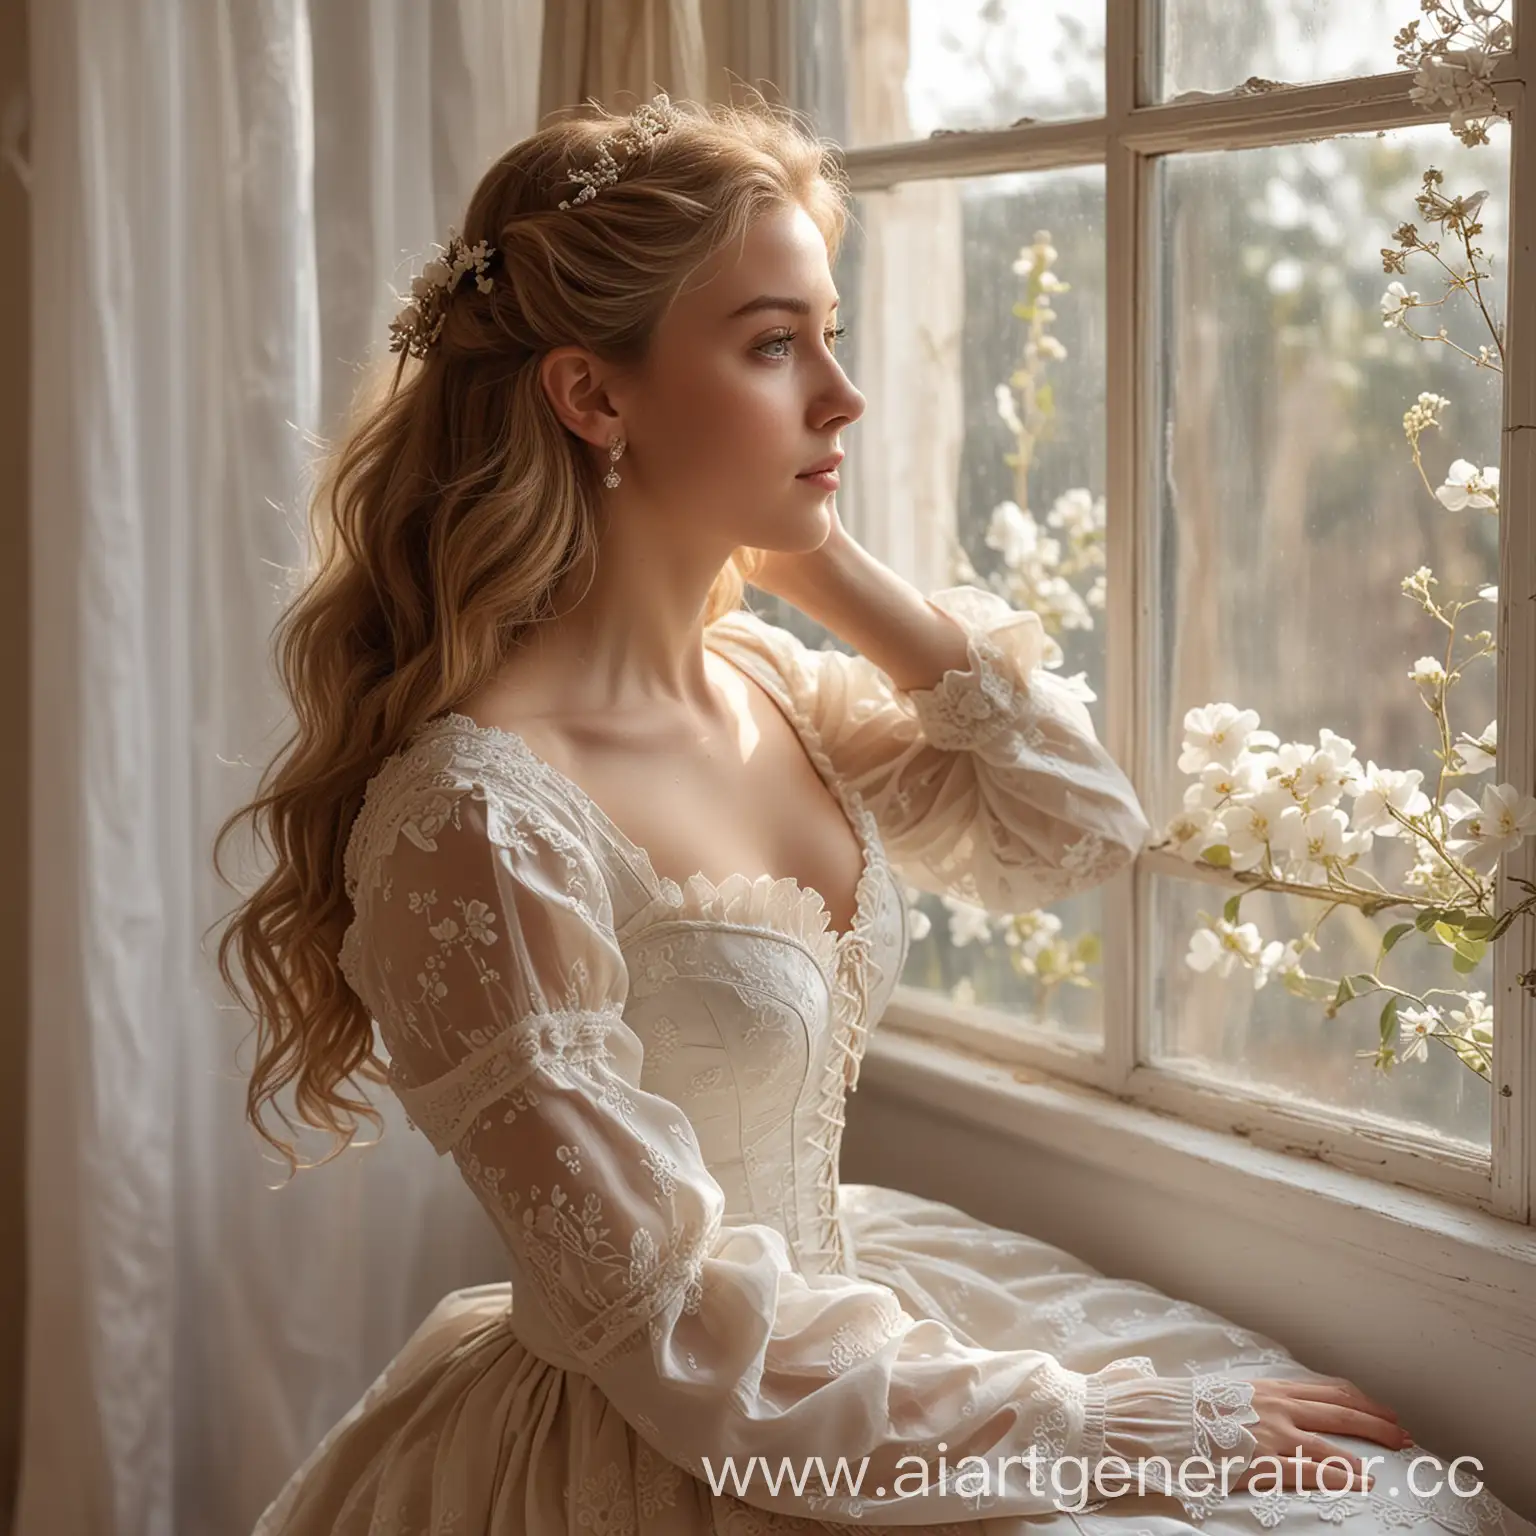 
In the image, a girl is sitting near the window. The window fills the room with soft, warm light. The girl is wrapped in profile to the camera, and her light brown hair falls in waves. Her dress is a delicate white shade with decorative elements that resemble flowers or appliques, the dress has an exquisite corset from the era of Bajo. Next to her, on the windowsill and in the space of the room, you can see exquisite flowers. The setting is exquisite and full of romantic atmosphere.